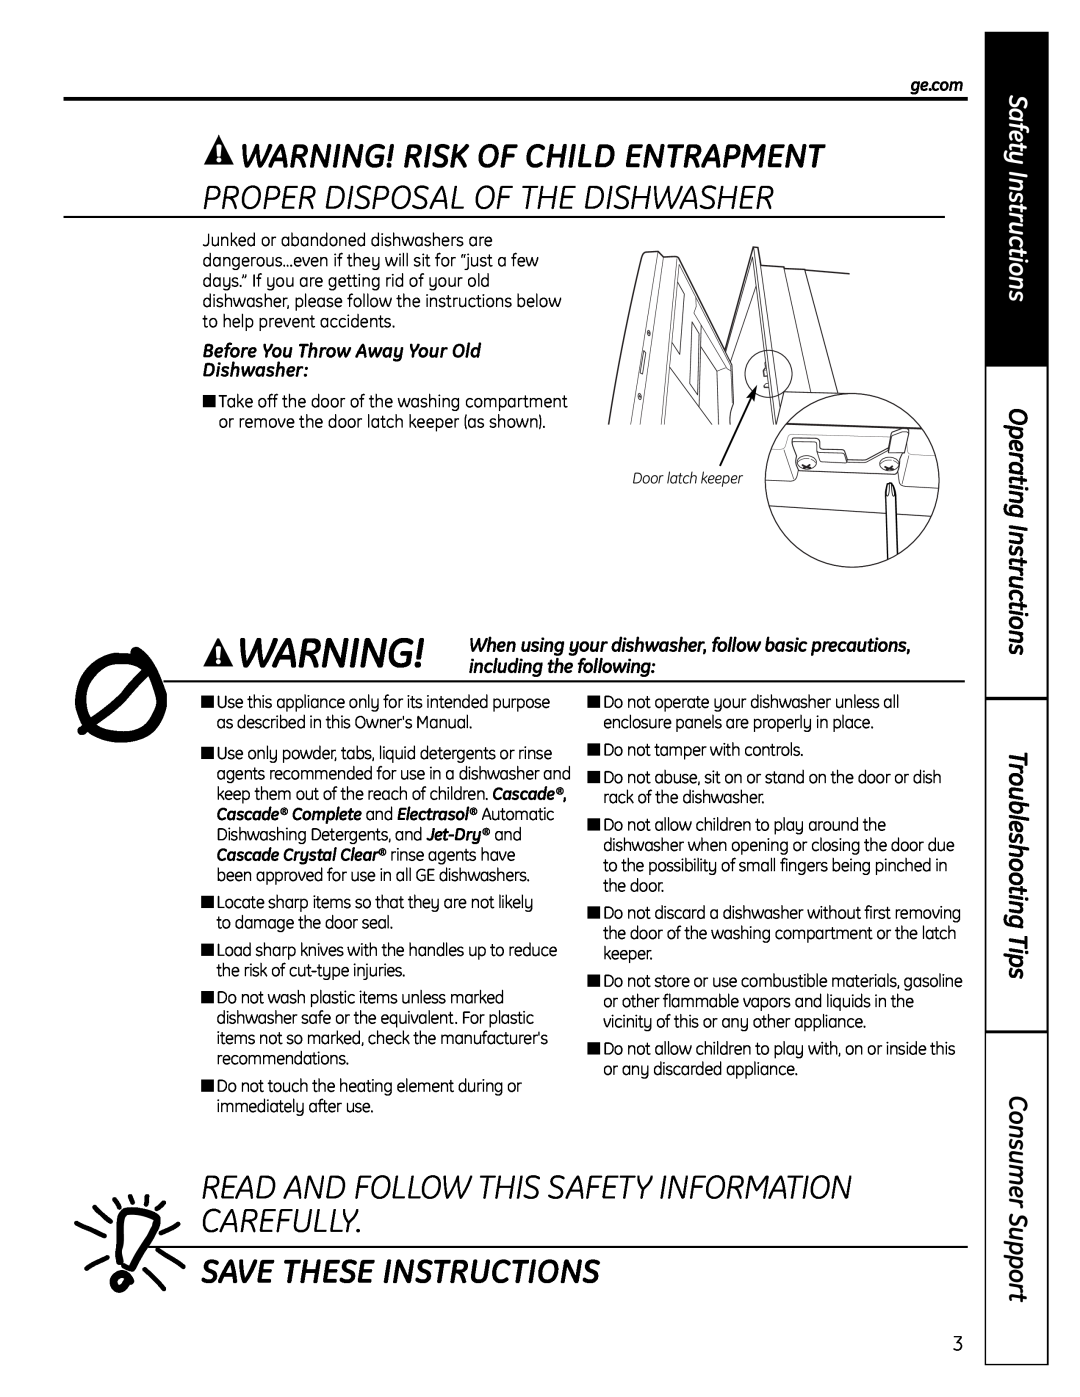 GE GSD1000, HDA3000 Warning! Risk Of Child Entrapment, Proper Disposal Of The Dishwasher, Support, Save These Instructions 